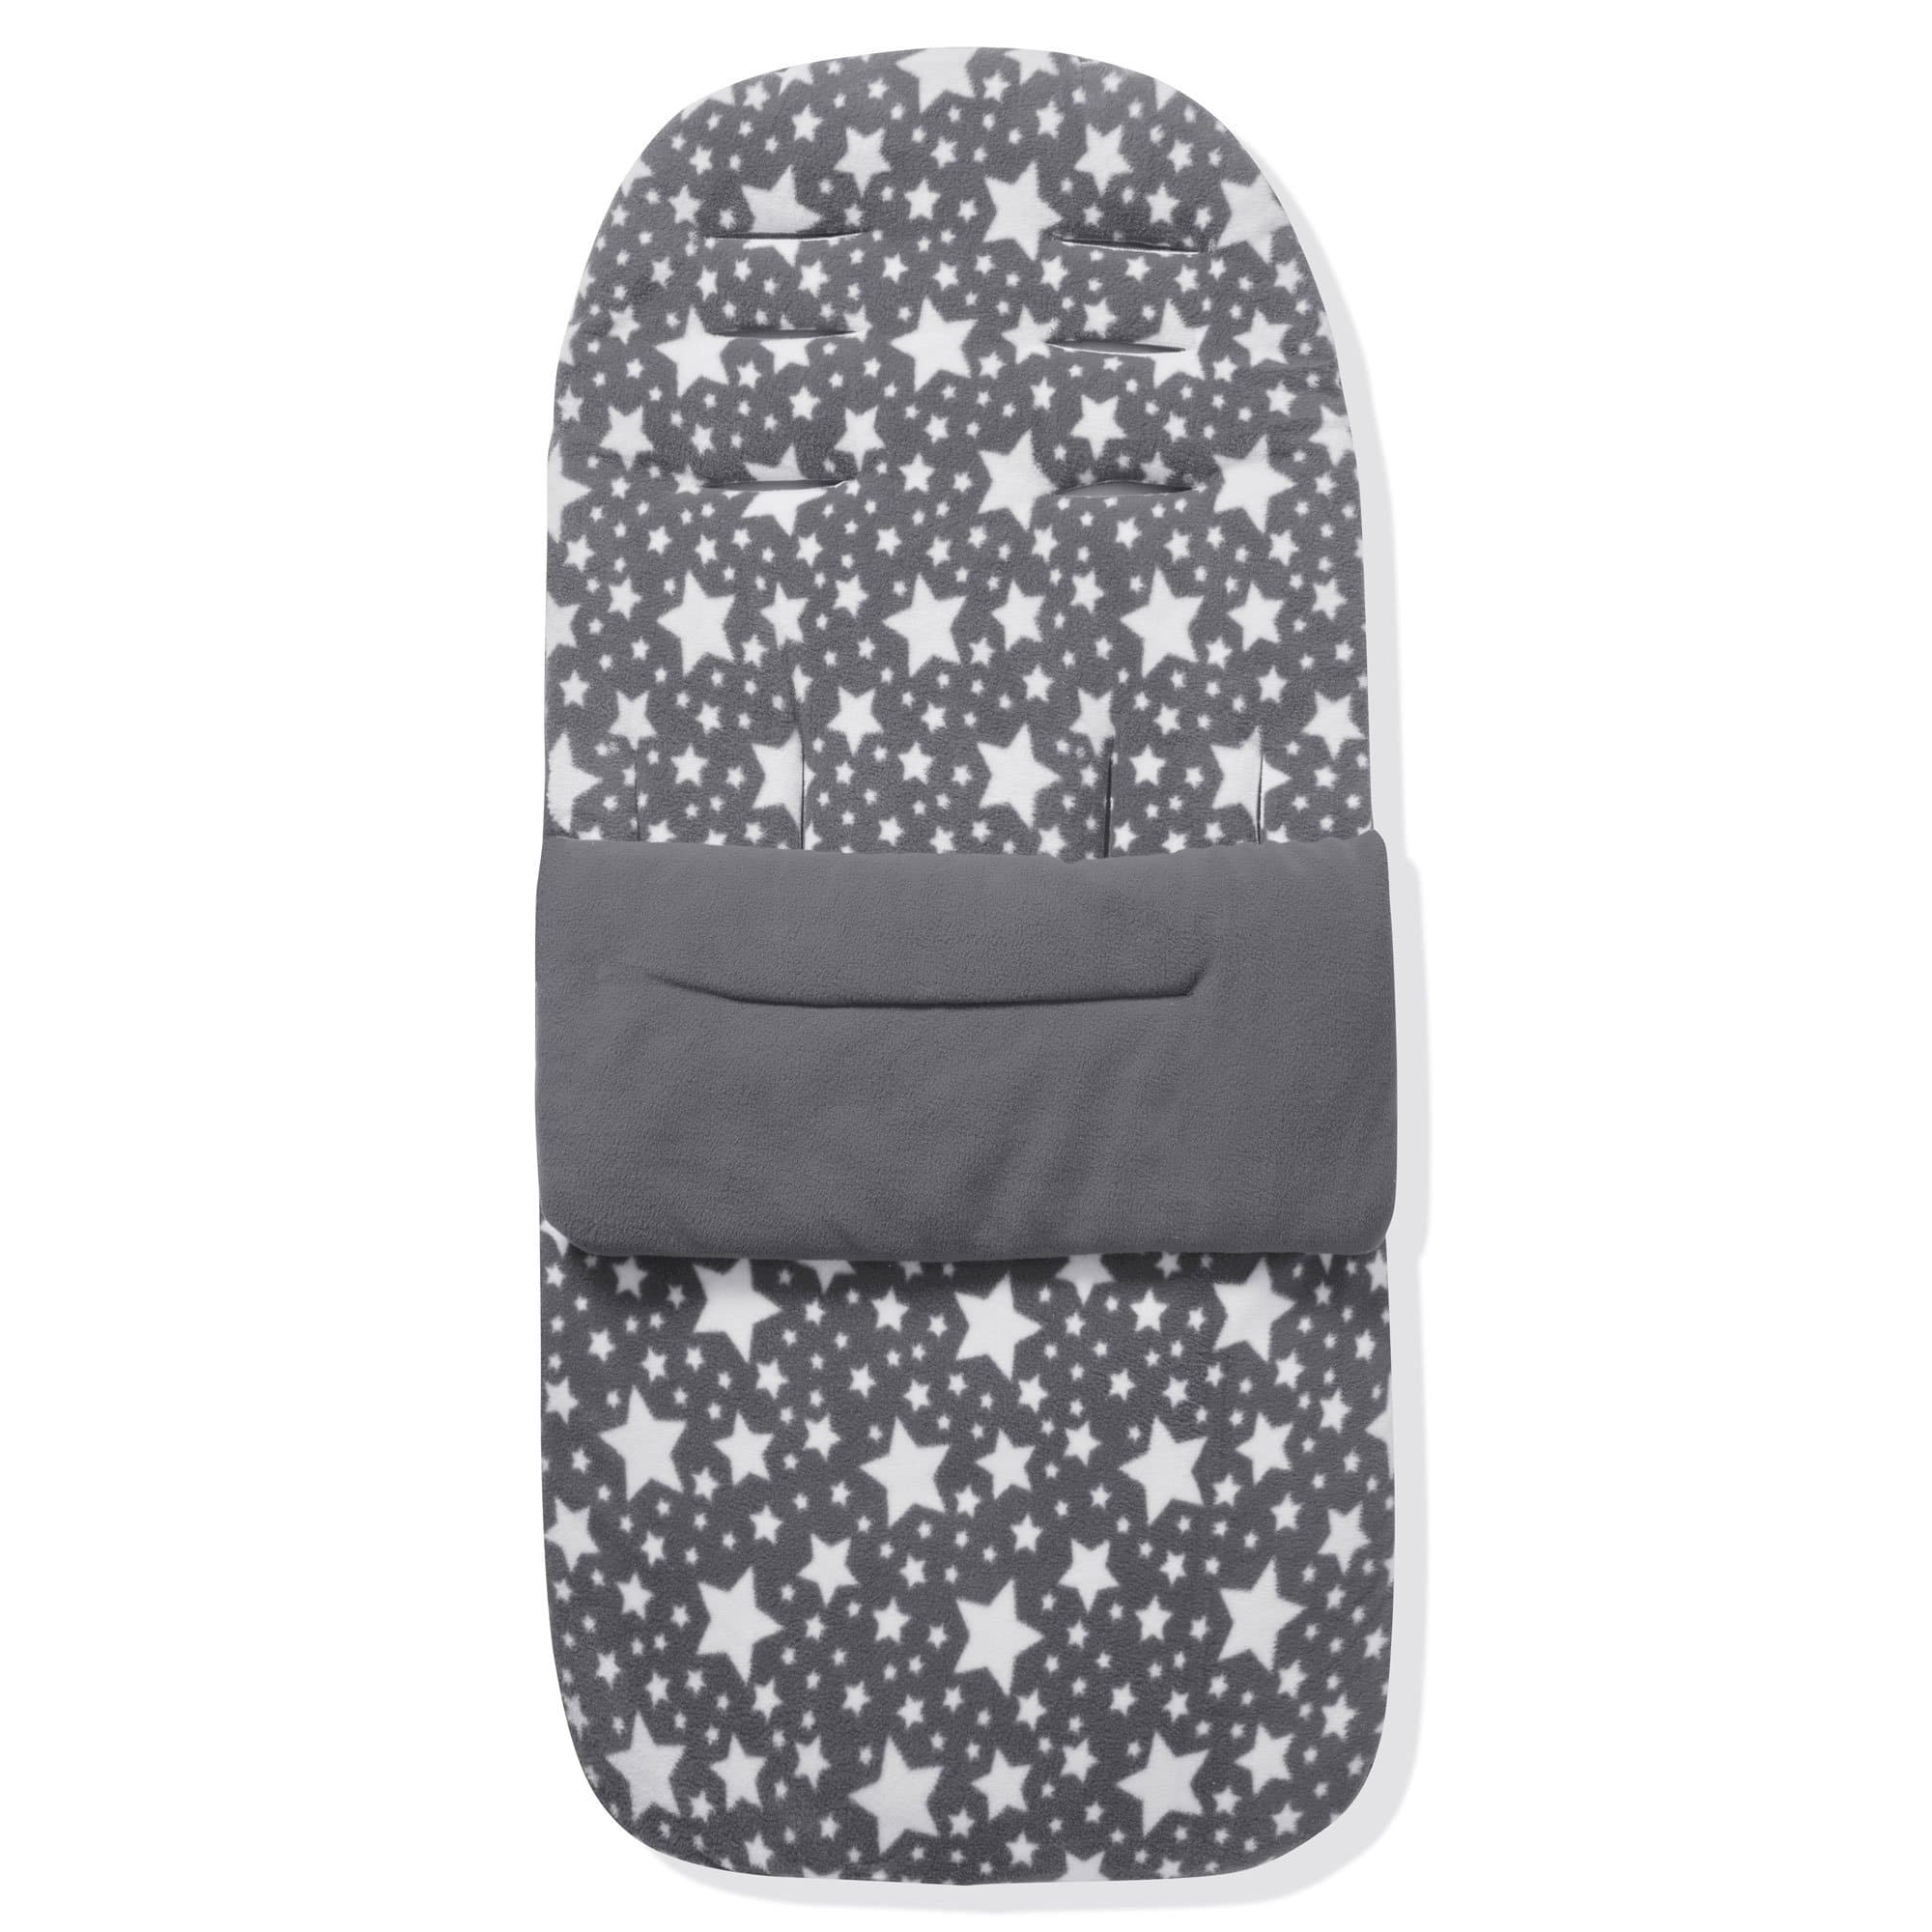 Fleece Footmuff / Cosy Toes Compatible with Tippitoes - Grey Star / Fits All Models | For Your Little One